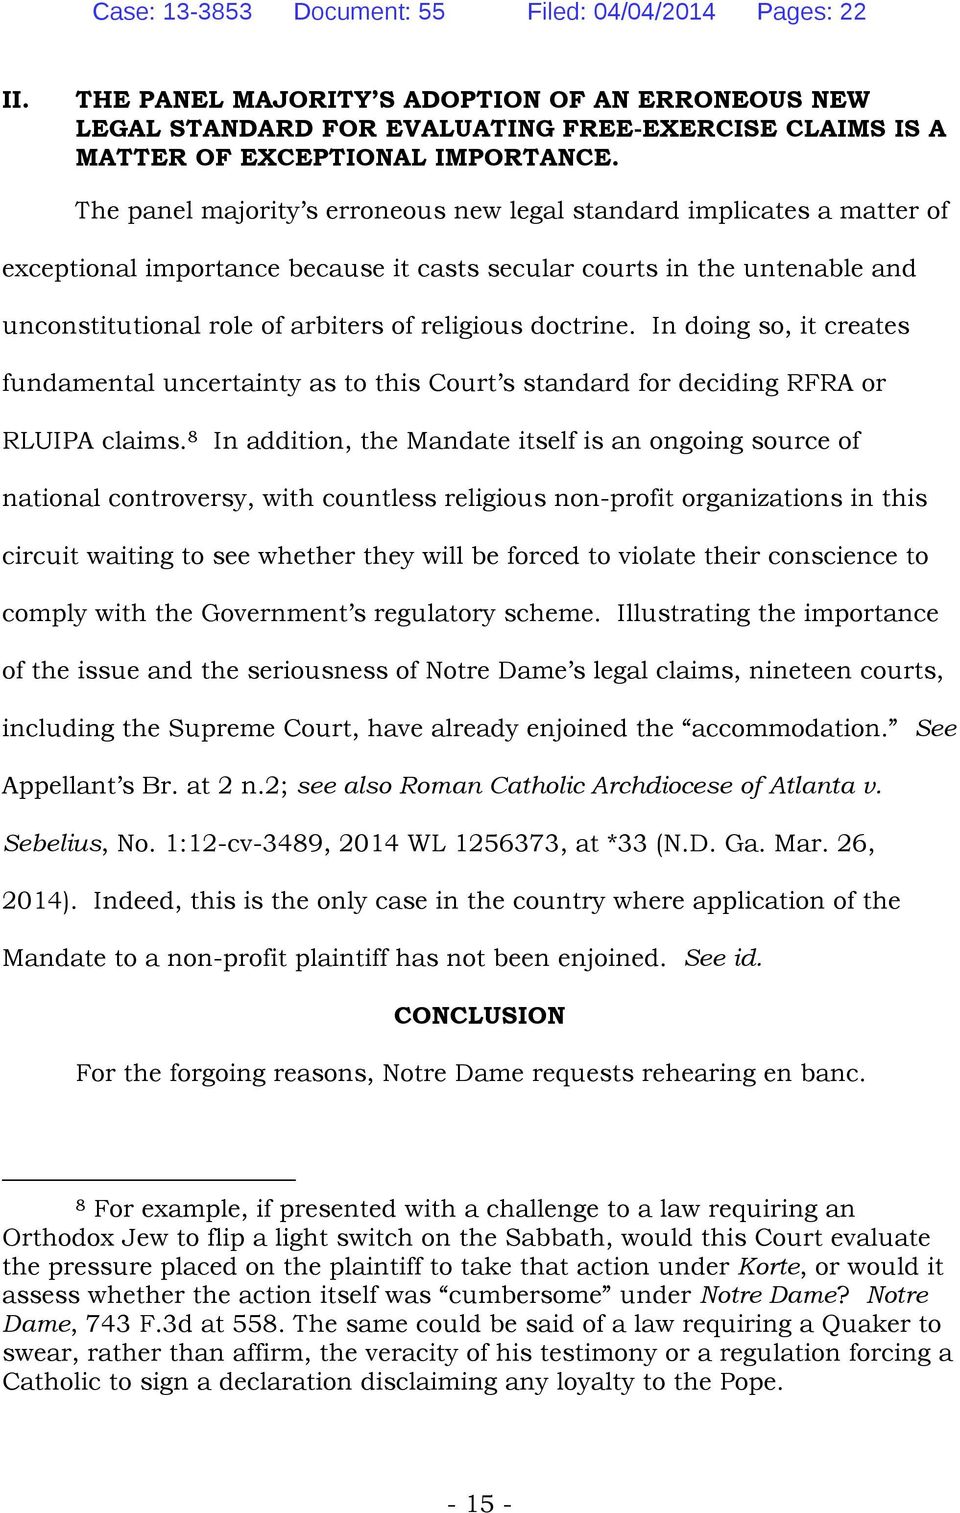 doctrine. In doing so, it creates fundamental uncertainty as to this Court s standard for deciding RFRA or RLUIPA claims.